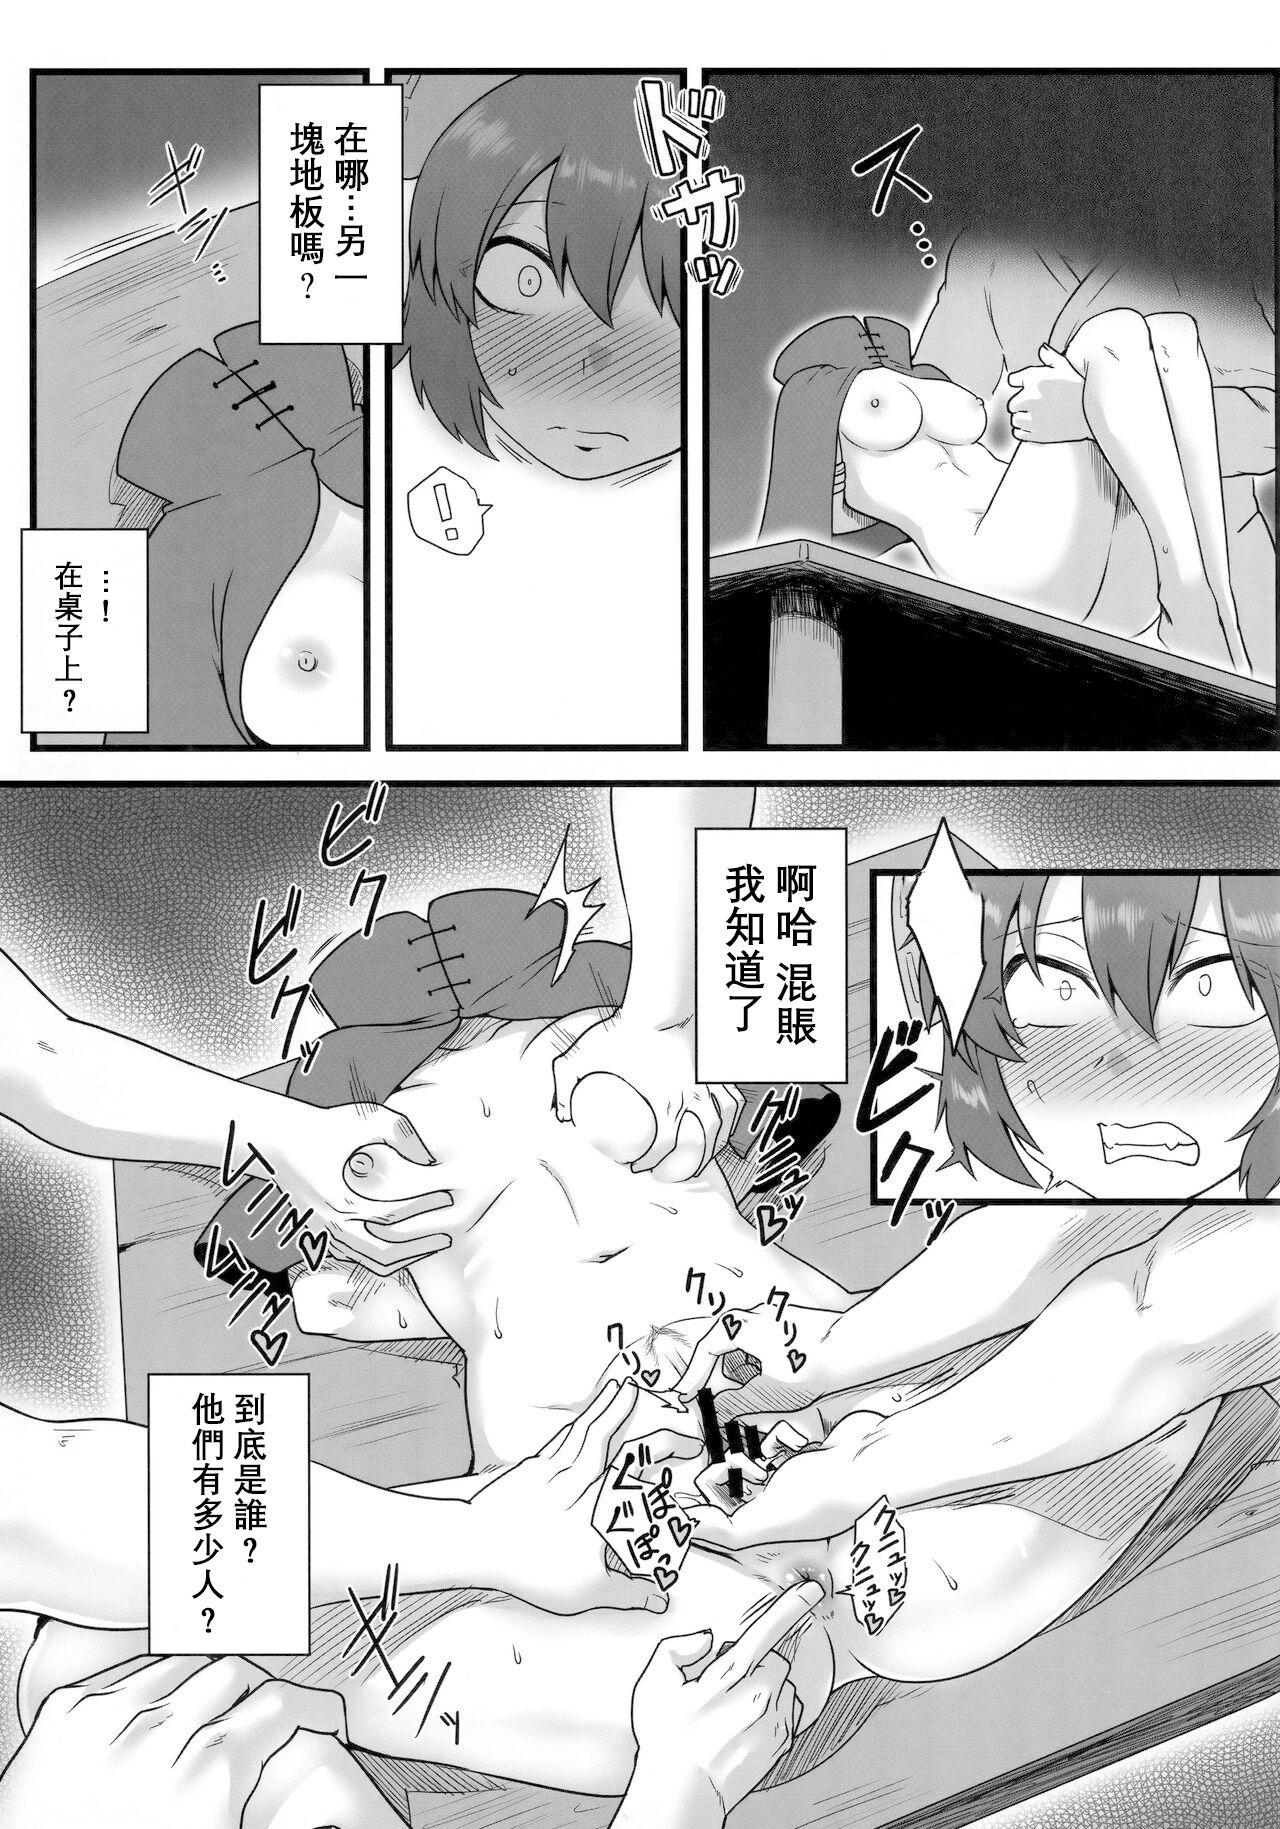 Chichona Onahobanki | 泄器蛮奇 - Touhou project Real Couple - Page 7